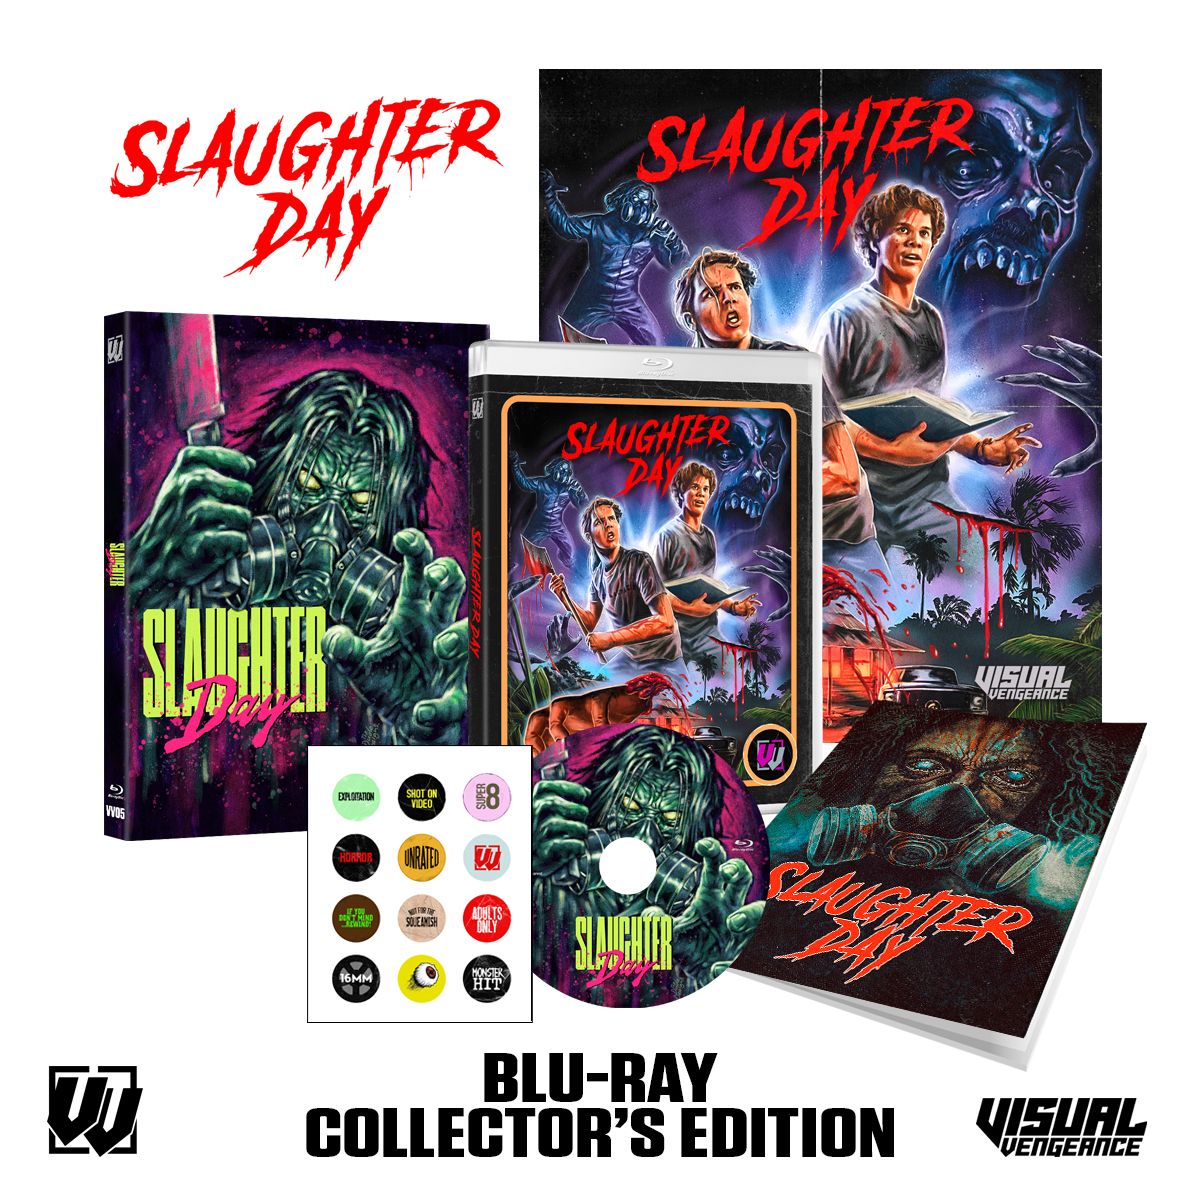 Slaughter Day Collector's Edition Blu-ray from Visual Vengeance